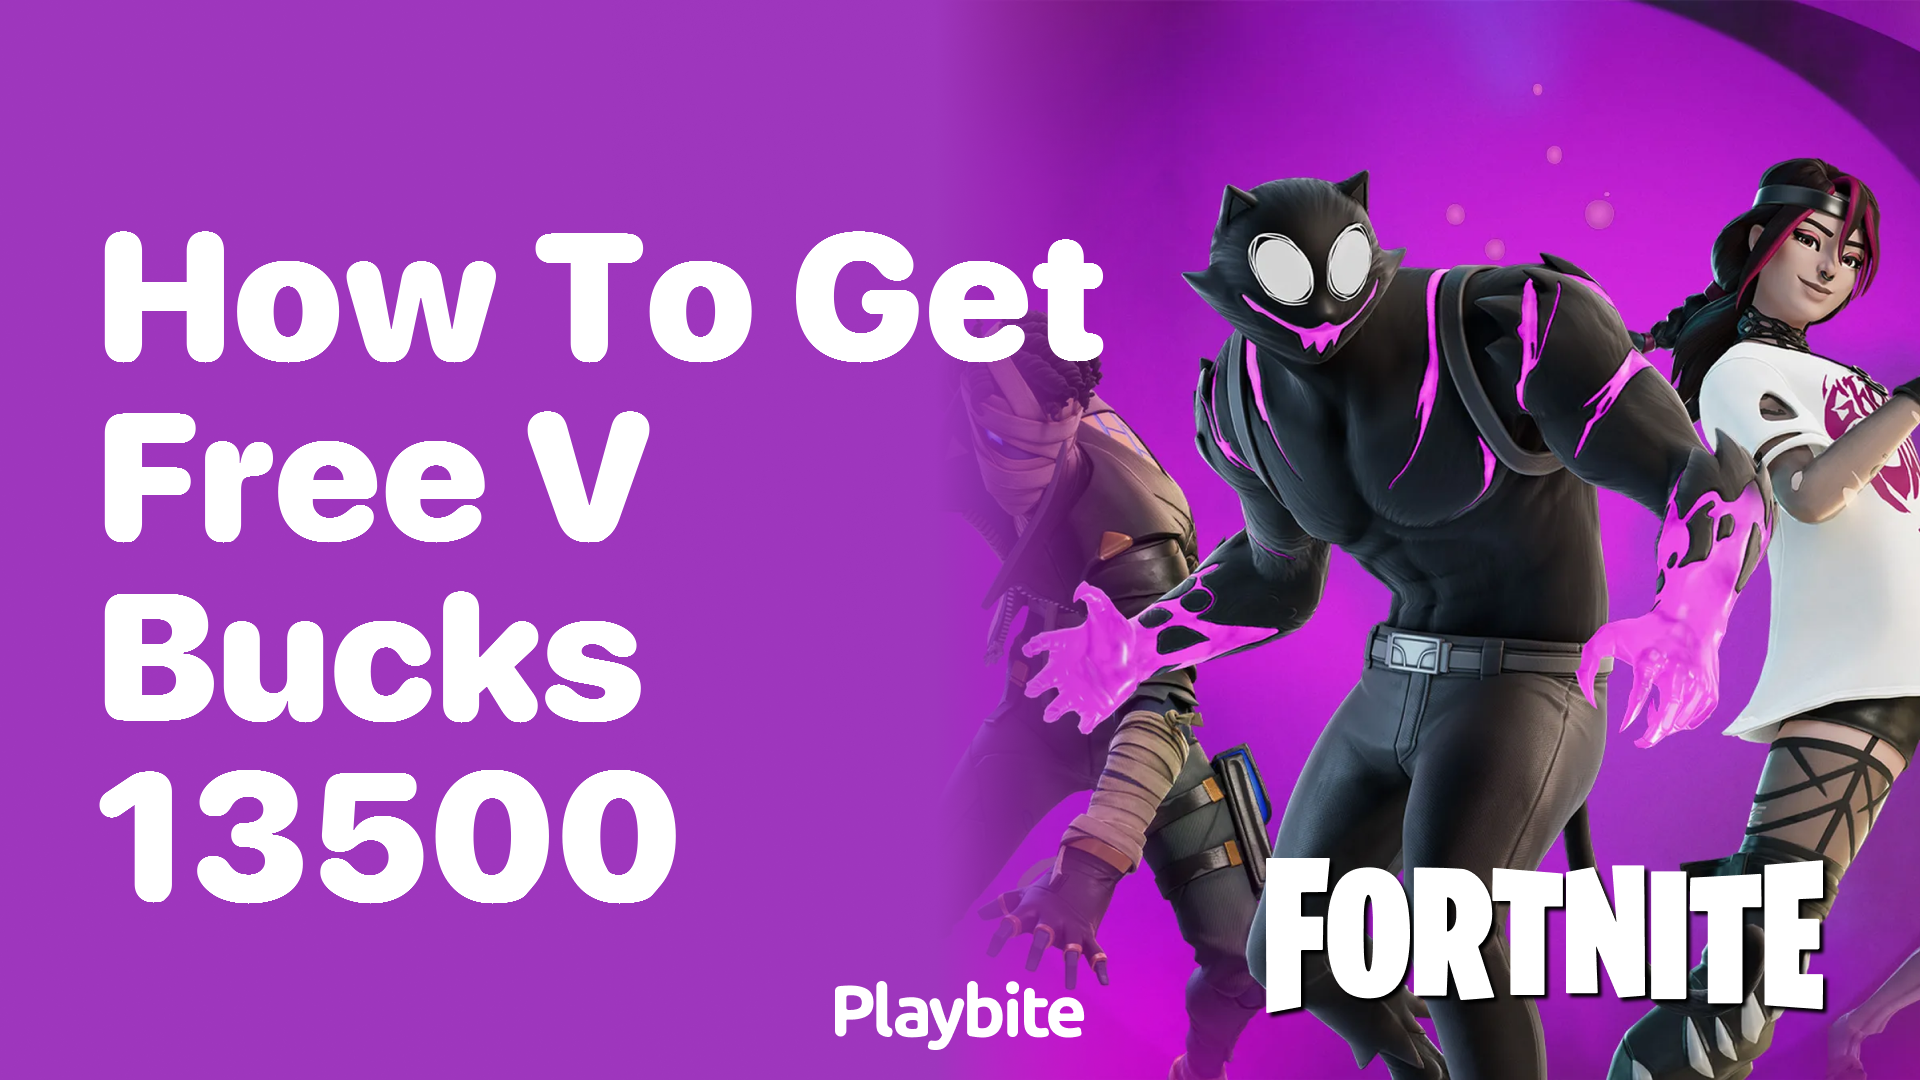 How to Get Free V-Bucks: 13,500 Up for Grabs!